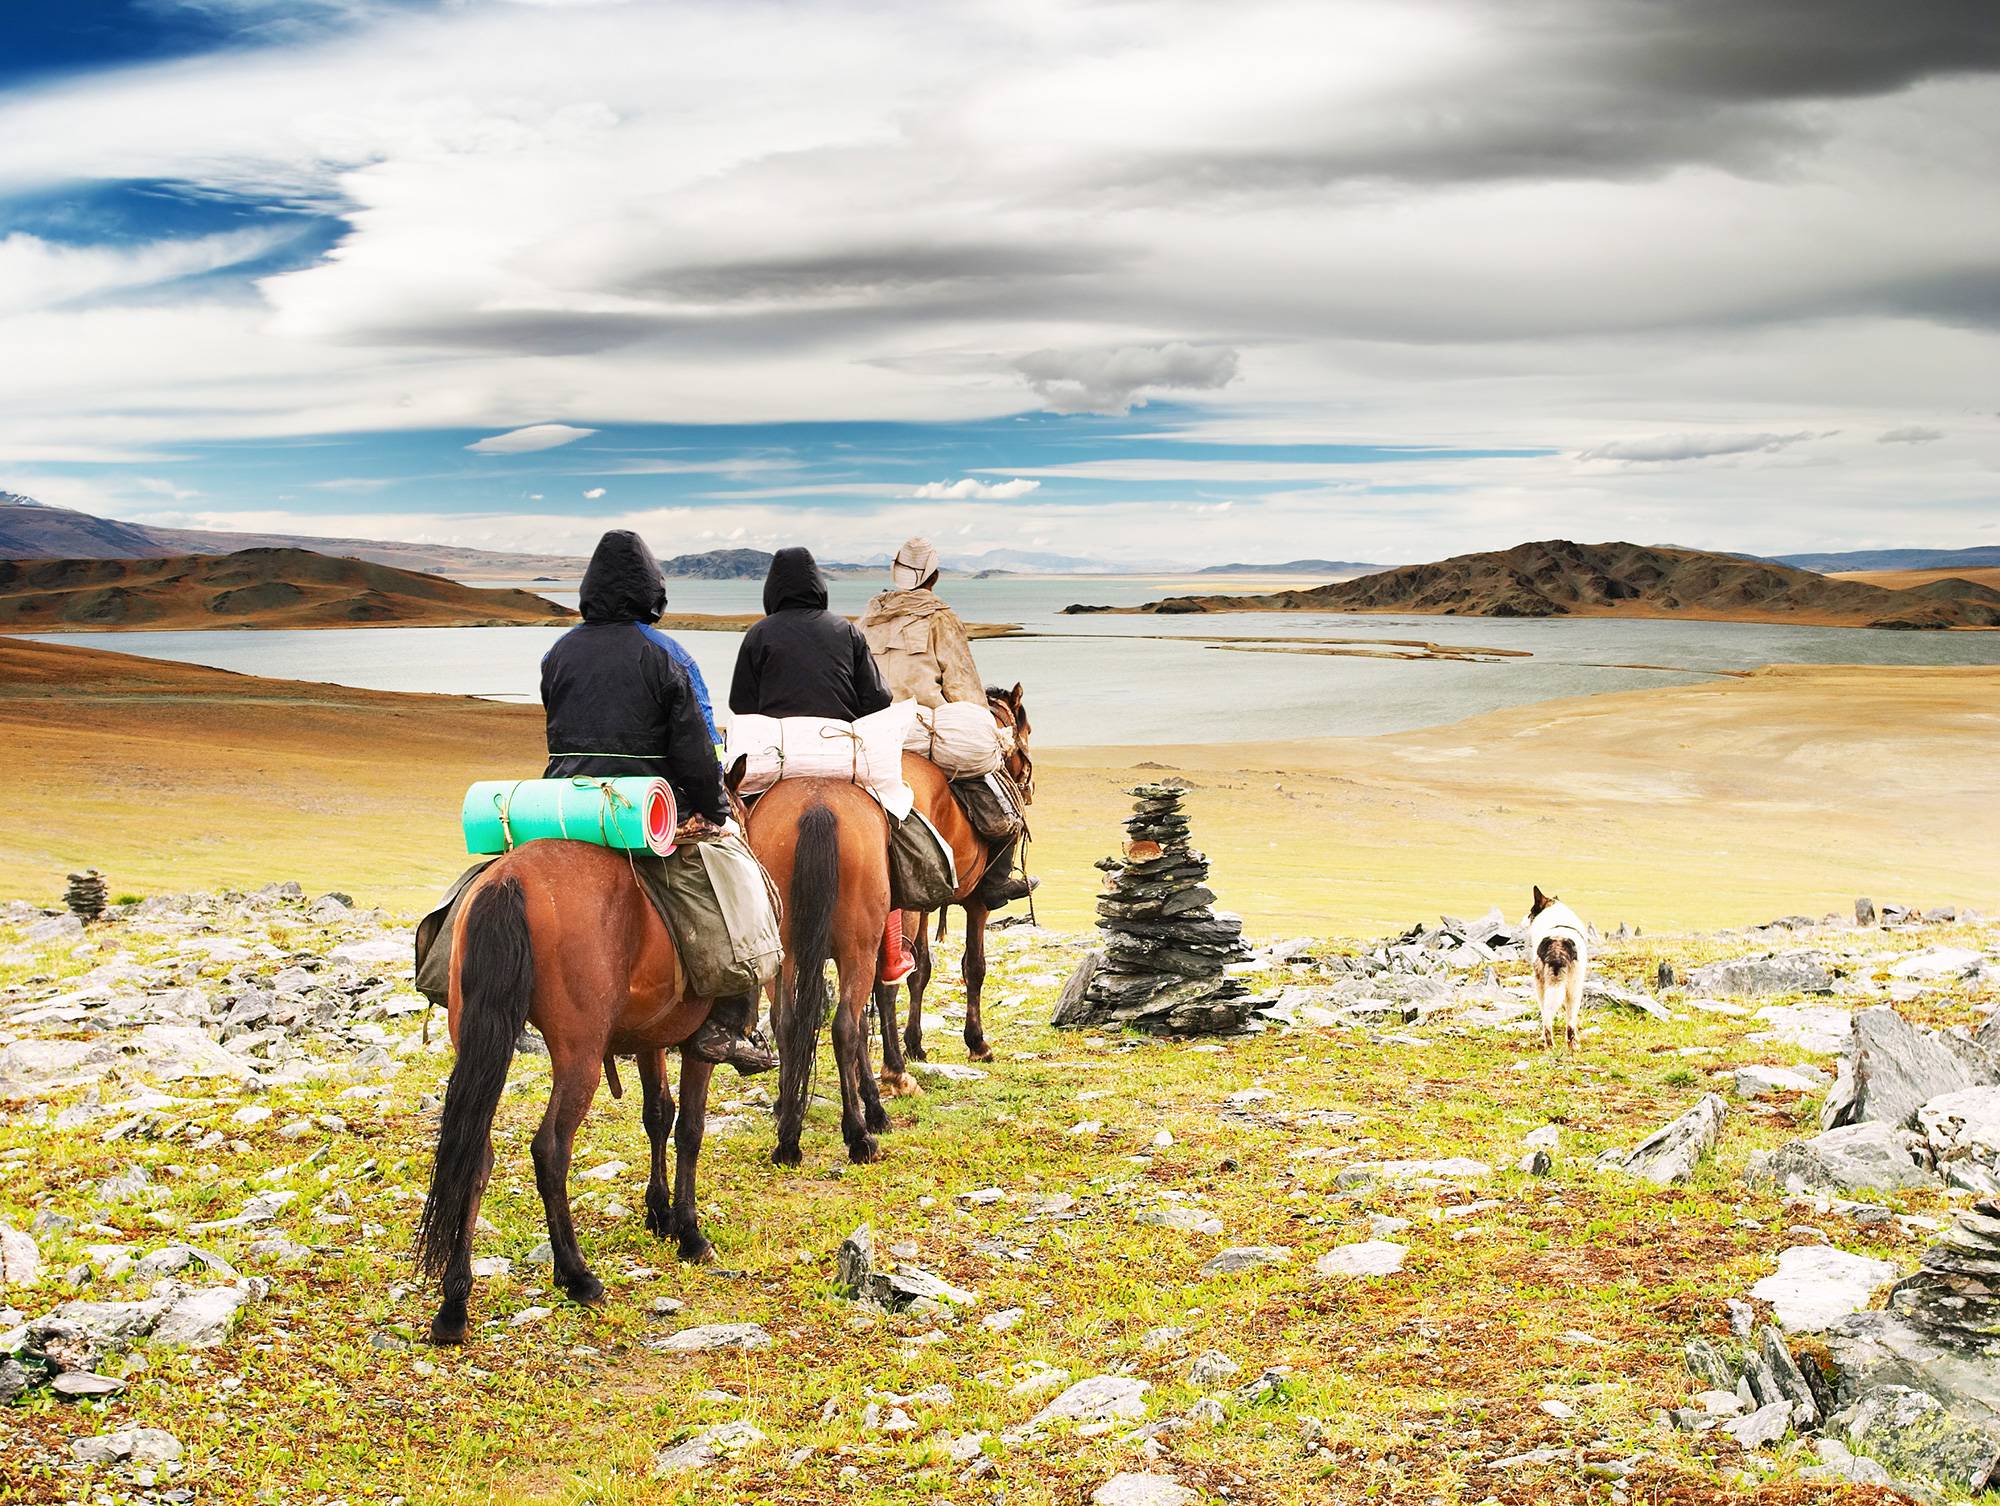 Yourte (Mongolie) — Chine Informations